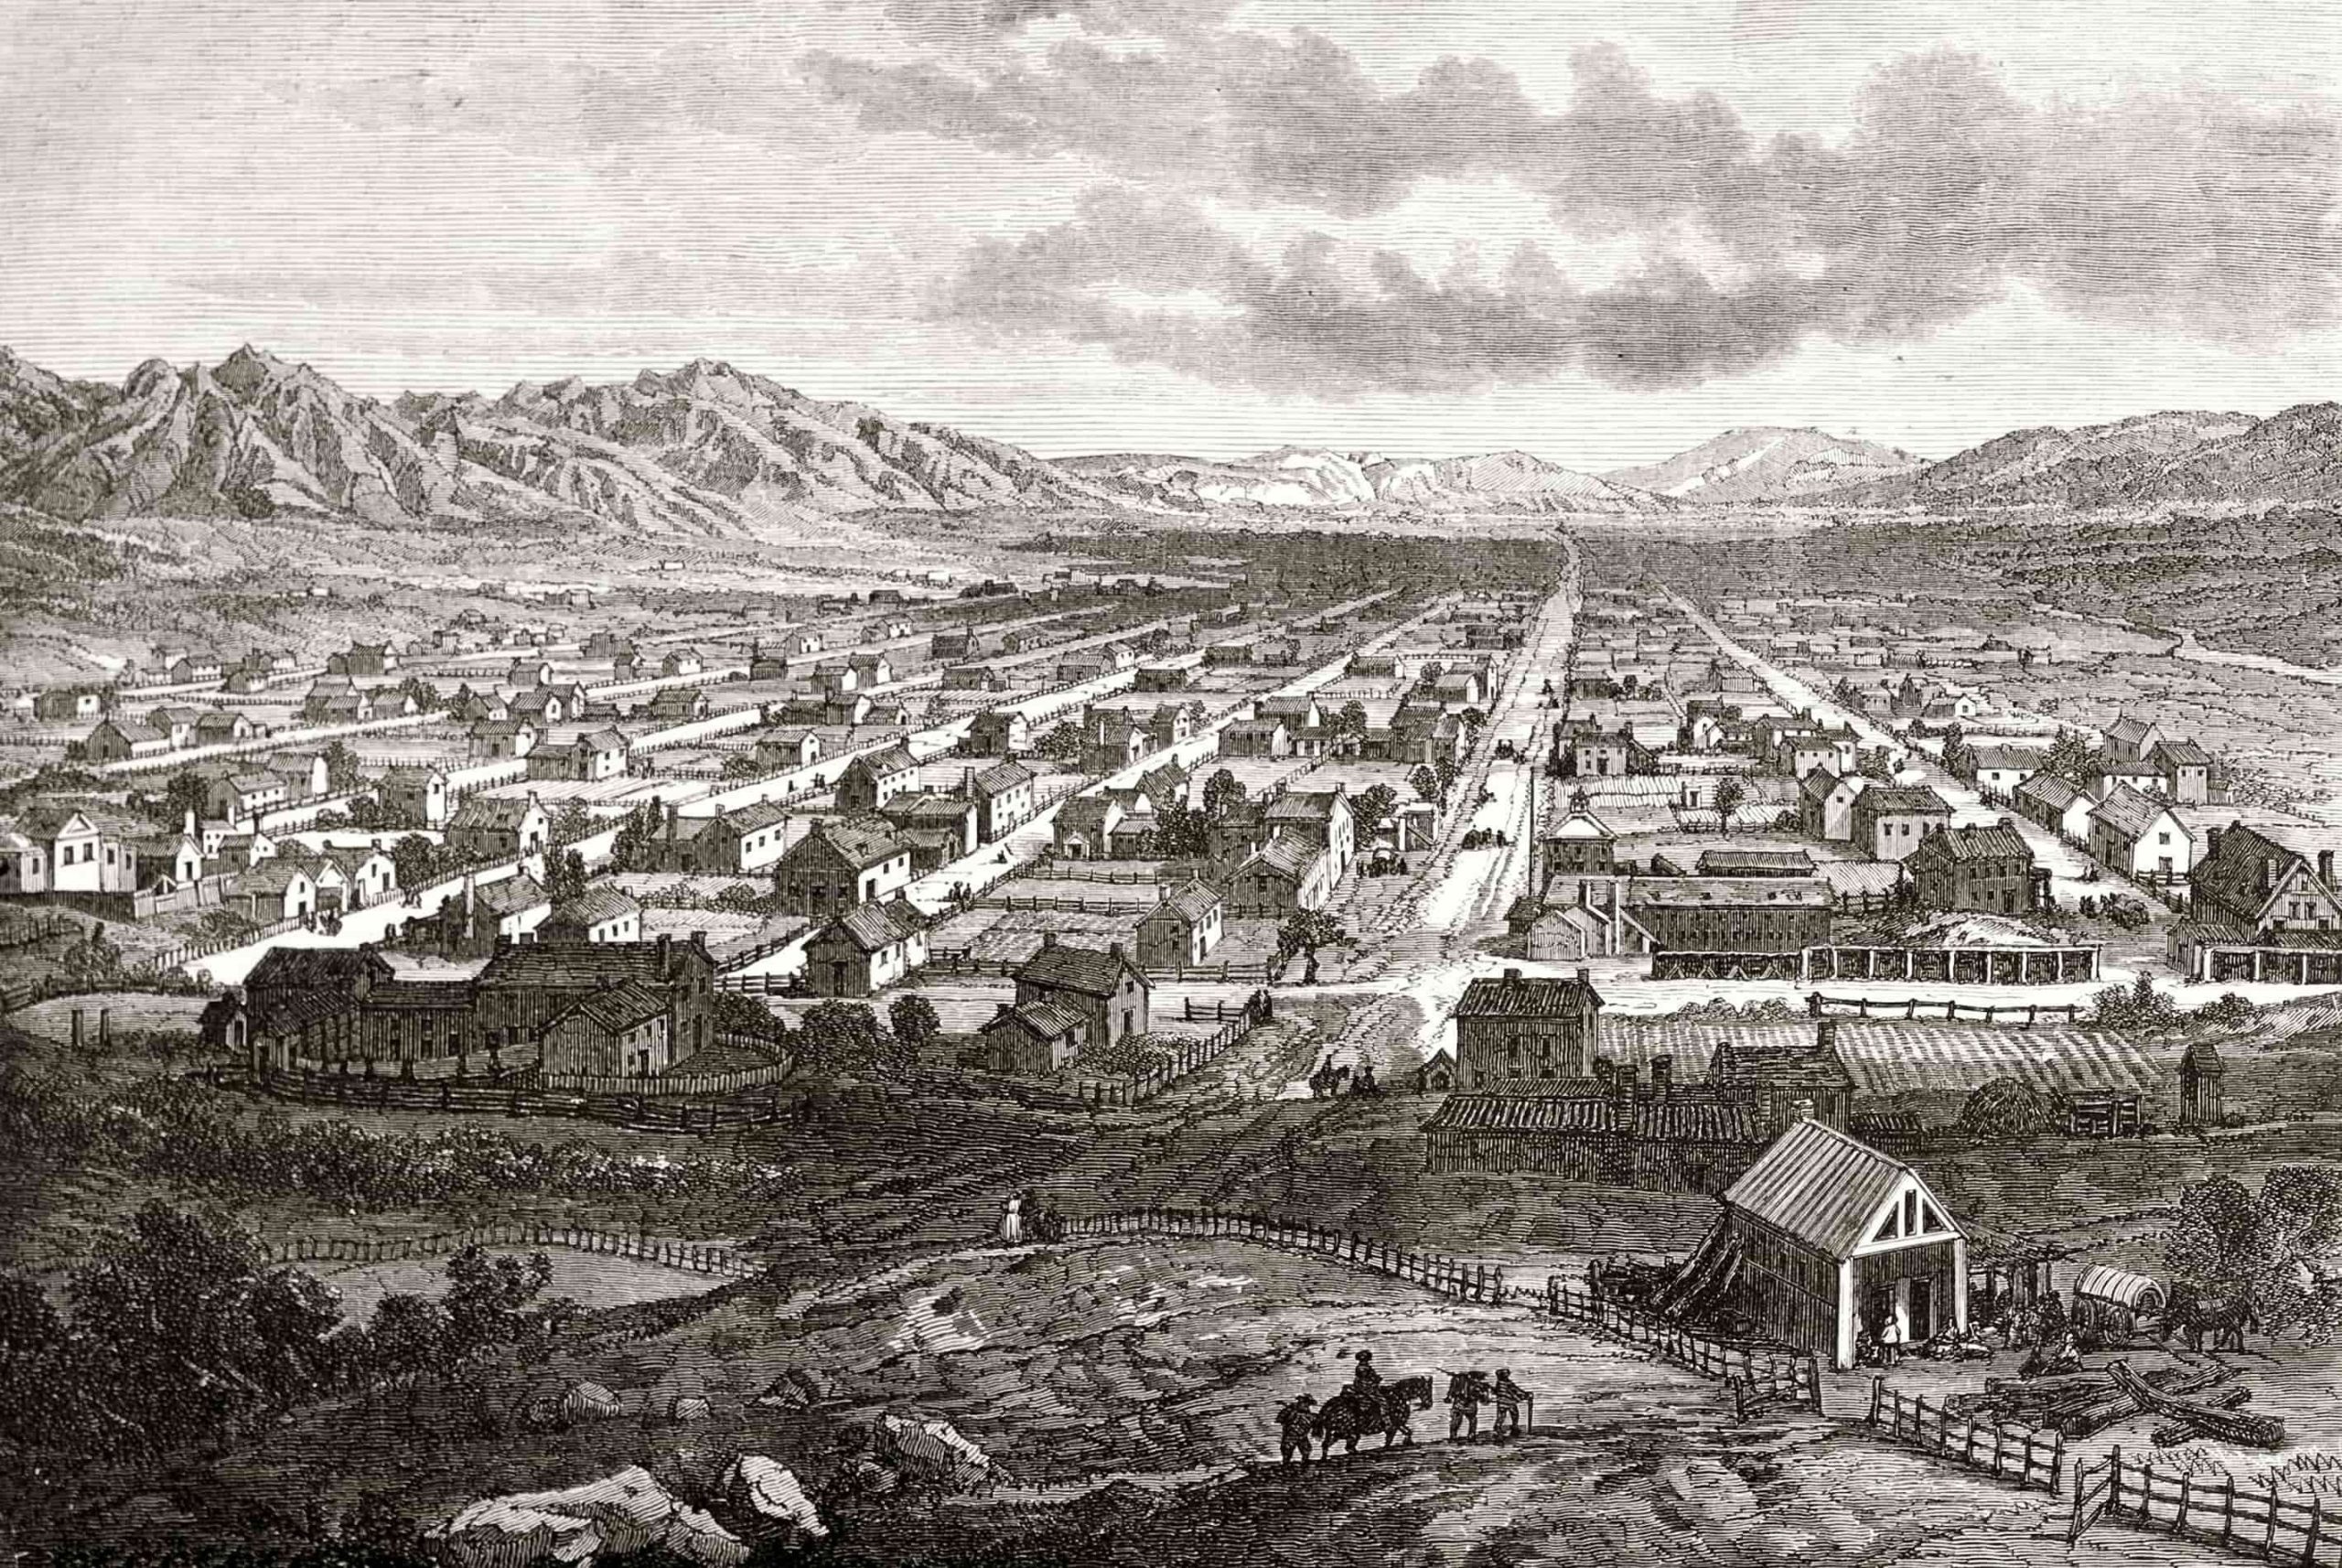 Historical Picture of the Salt Lake valley